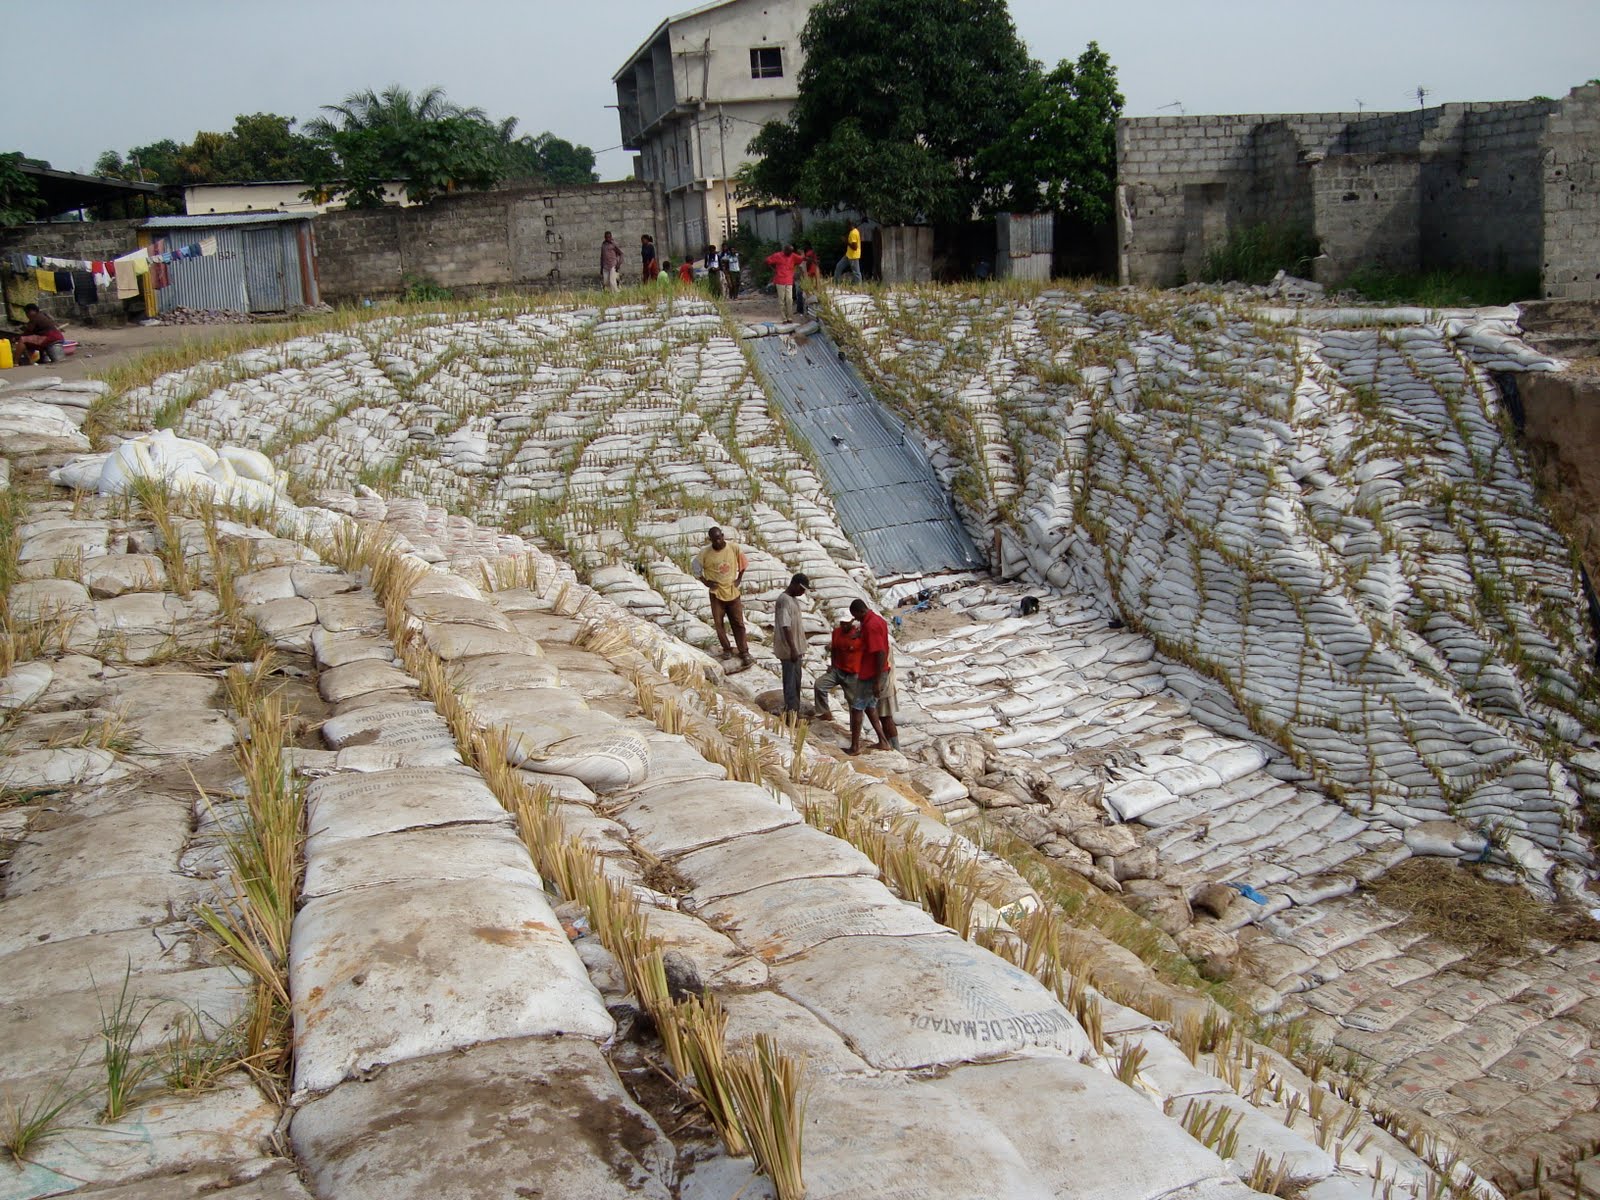 Bags and vetiver are used for erosion control.